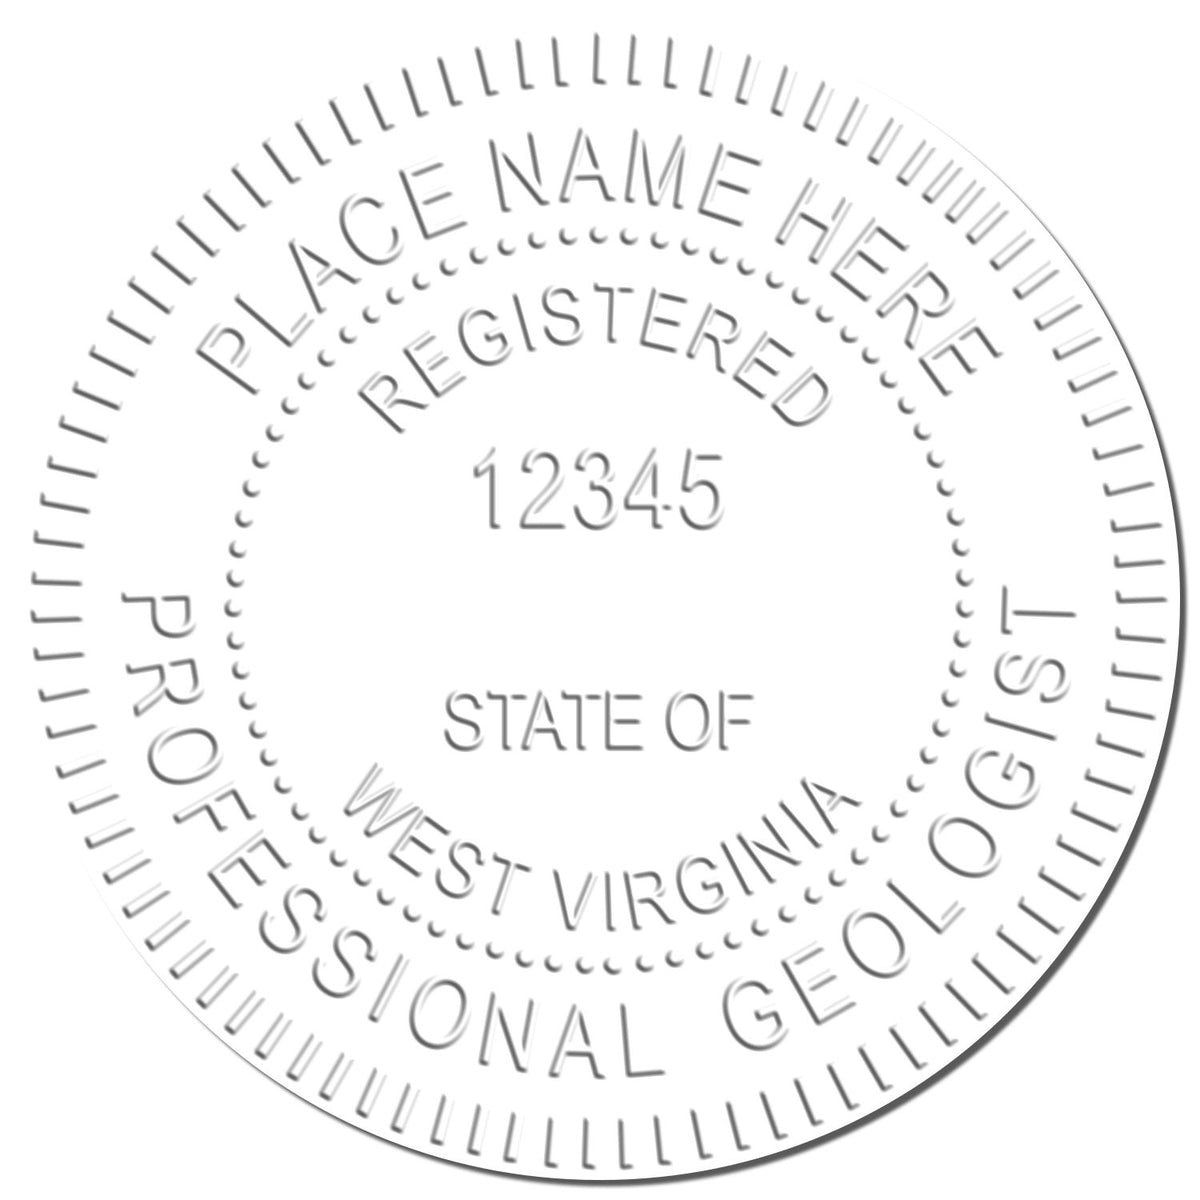 This paper is stamped with a sample imprint of the Handheld West Virginia Professional Geologist Embosser, signifying its quality and reliability.